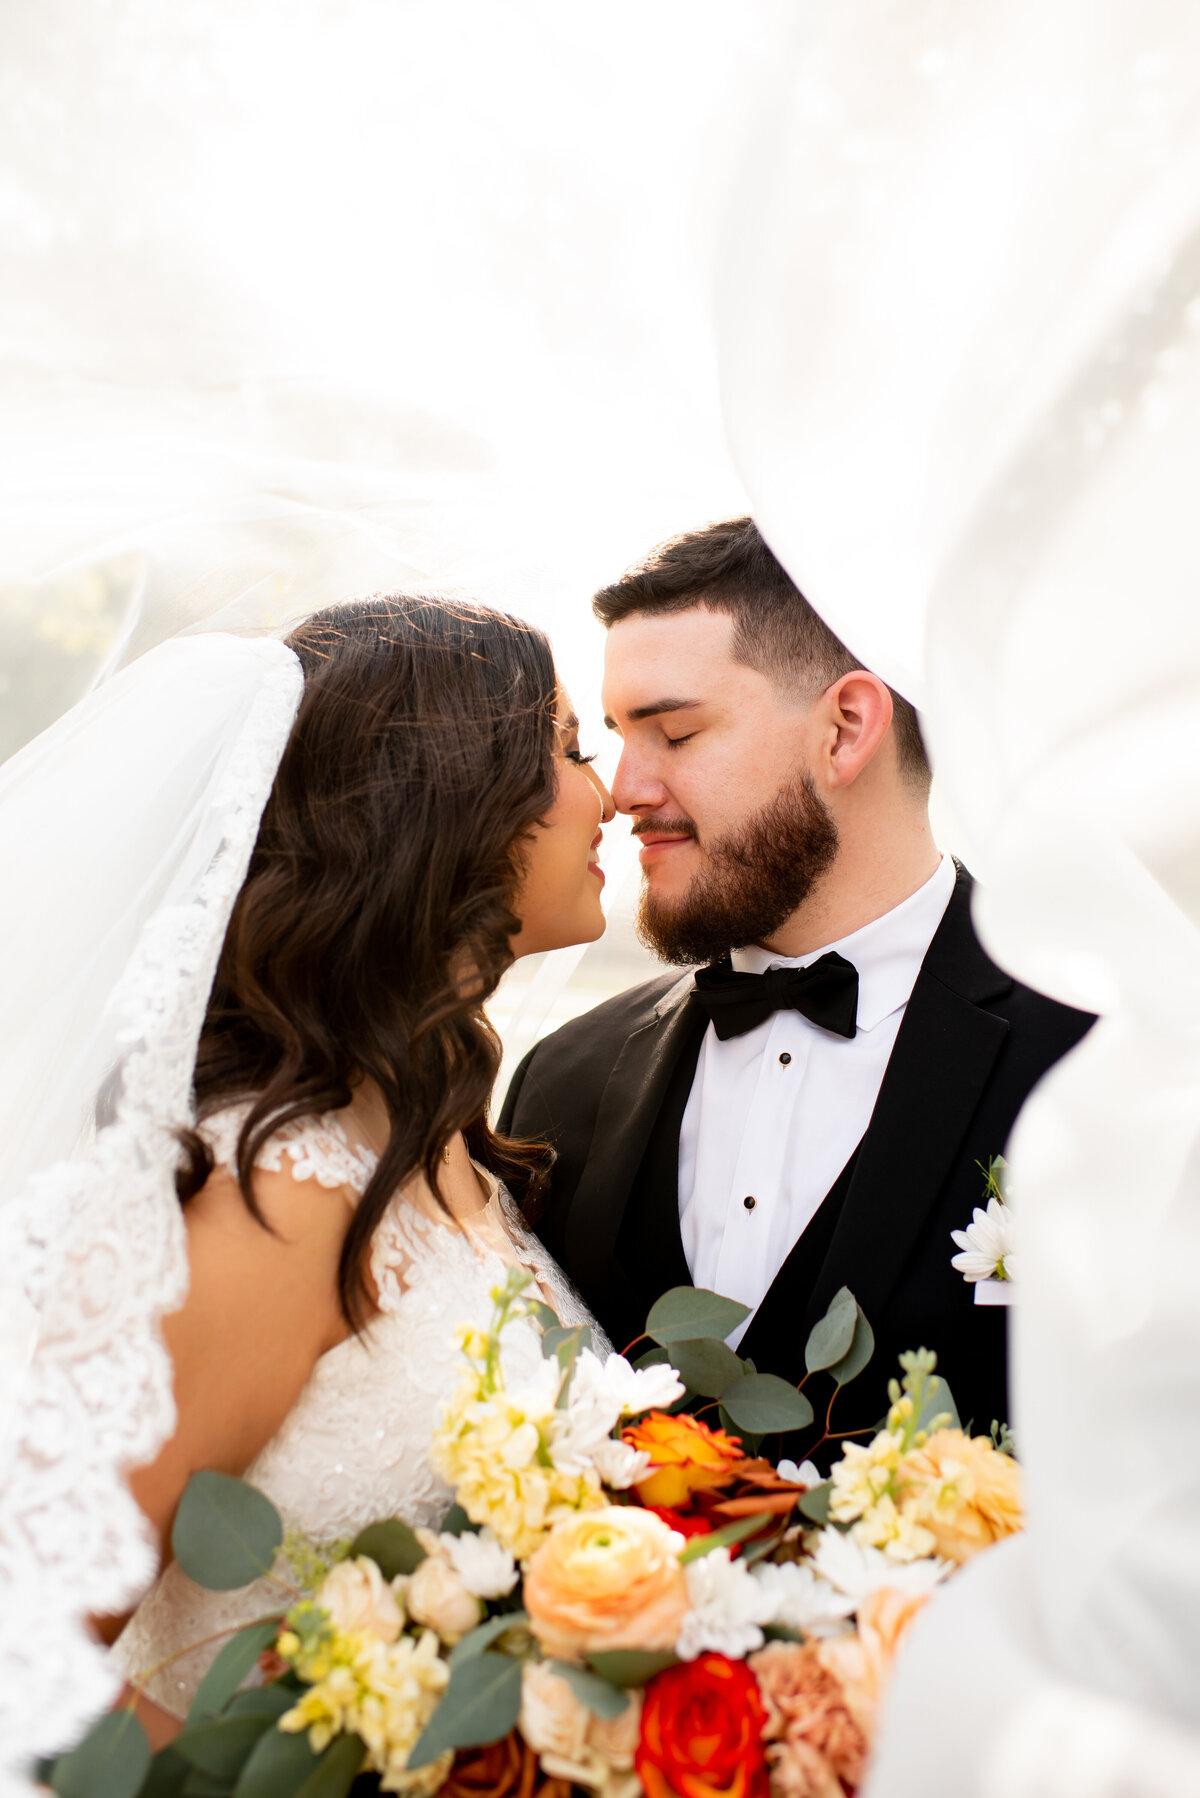 Experience the magic of love with a passionate kiss of the bride and groom, framed by a graceful veil, at Anais Events Center in Bellaire, Texas